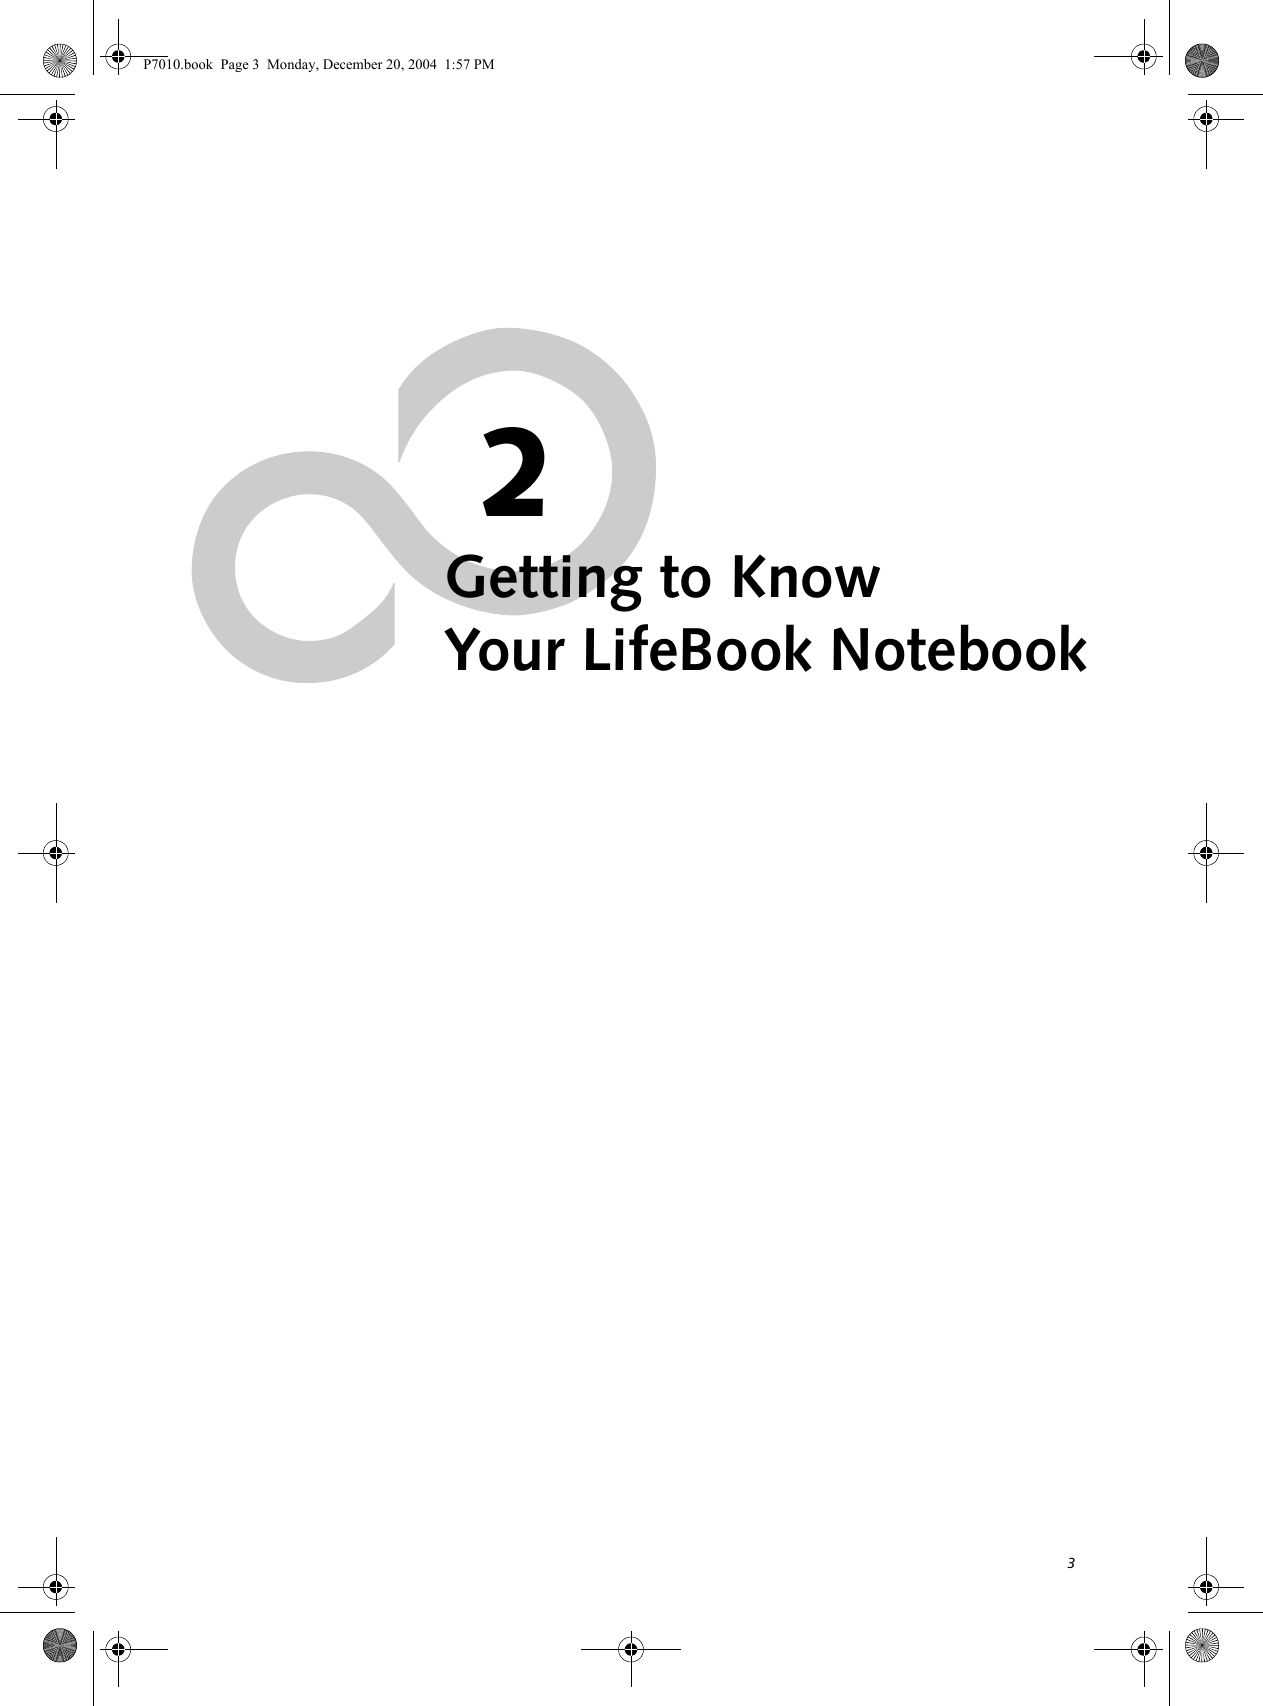 32Getting to KnowYour LifeBook NotebookP7010.book  Page 3  Monday, December 20, 2004  1:57 PM